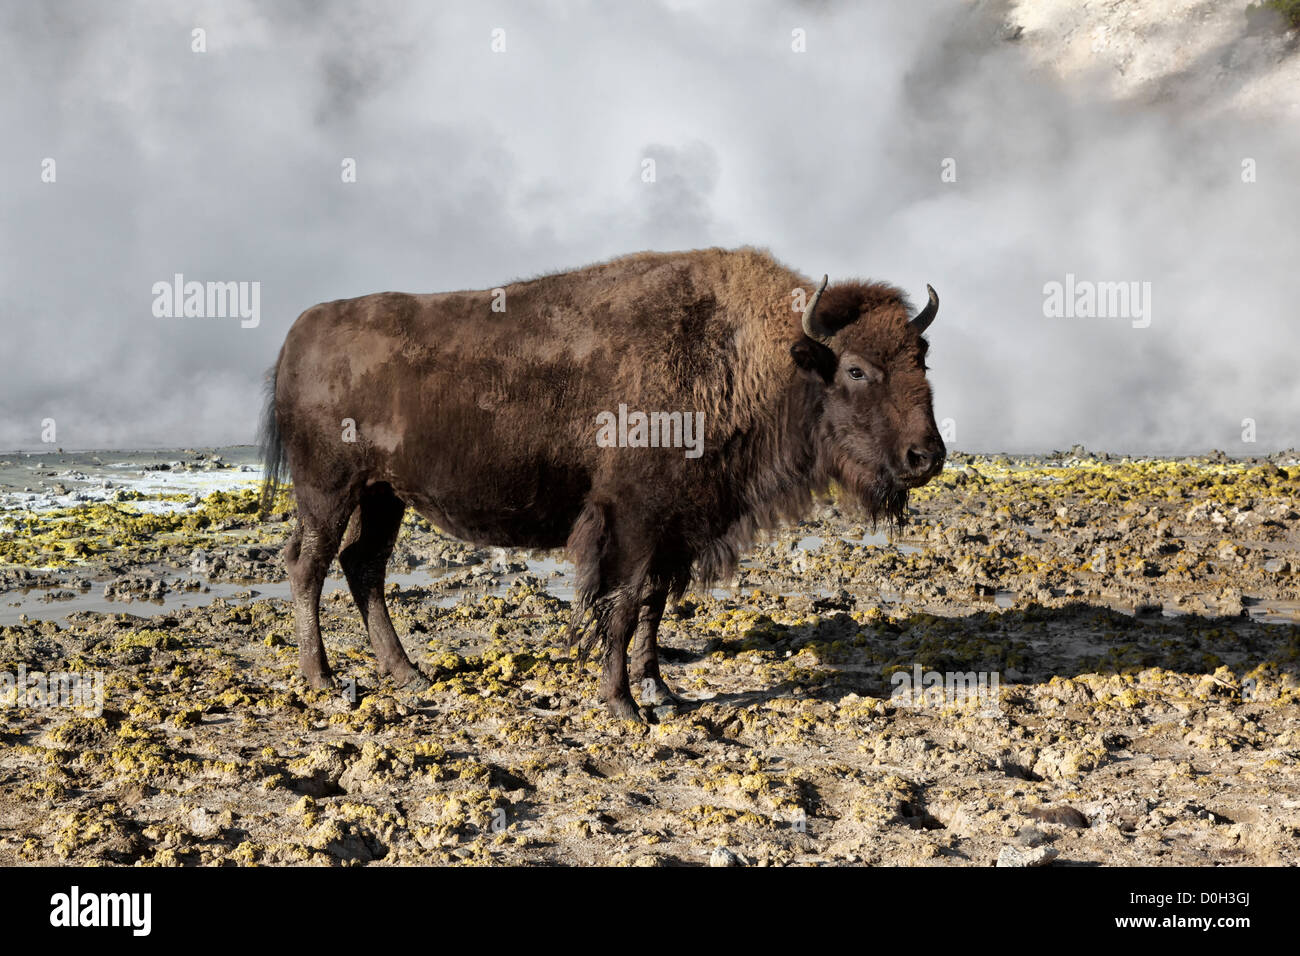 American Bison - female standing in the mud caldron - Yellowstone NP Stock Photo